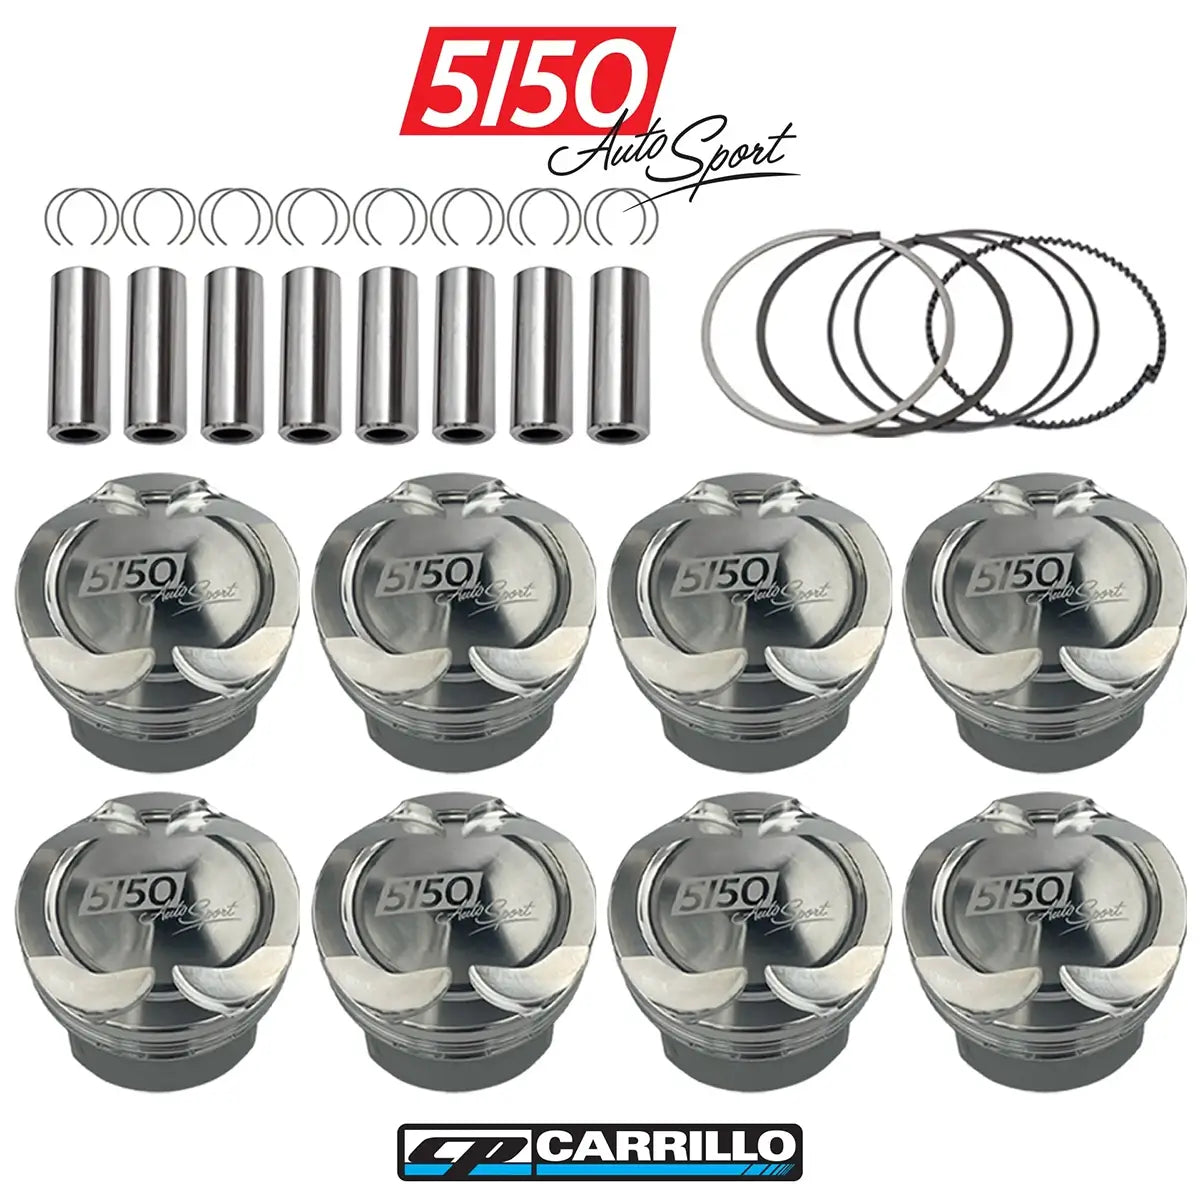 CP-Carrillo Forged Piston Set for BMW S63 Engines with Iron Sleeves